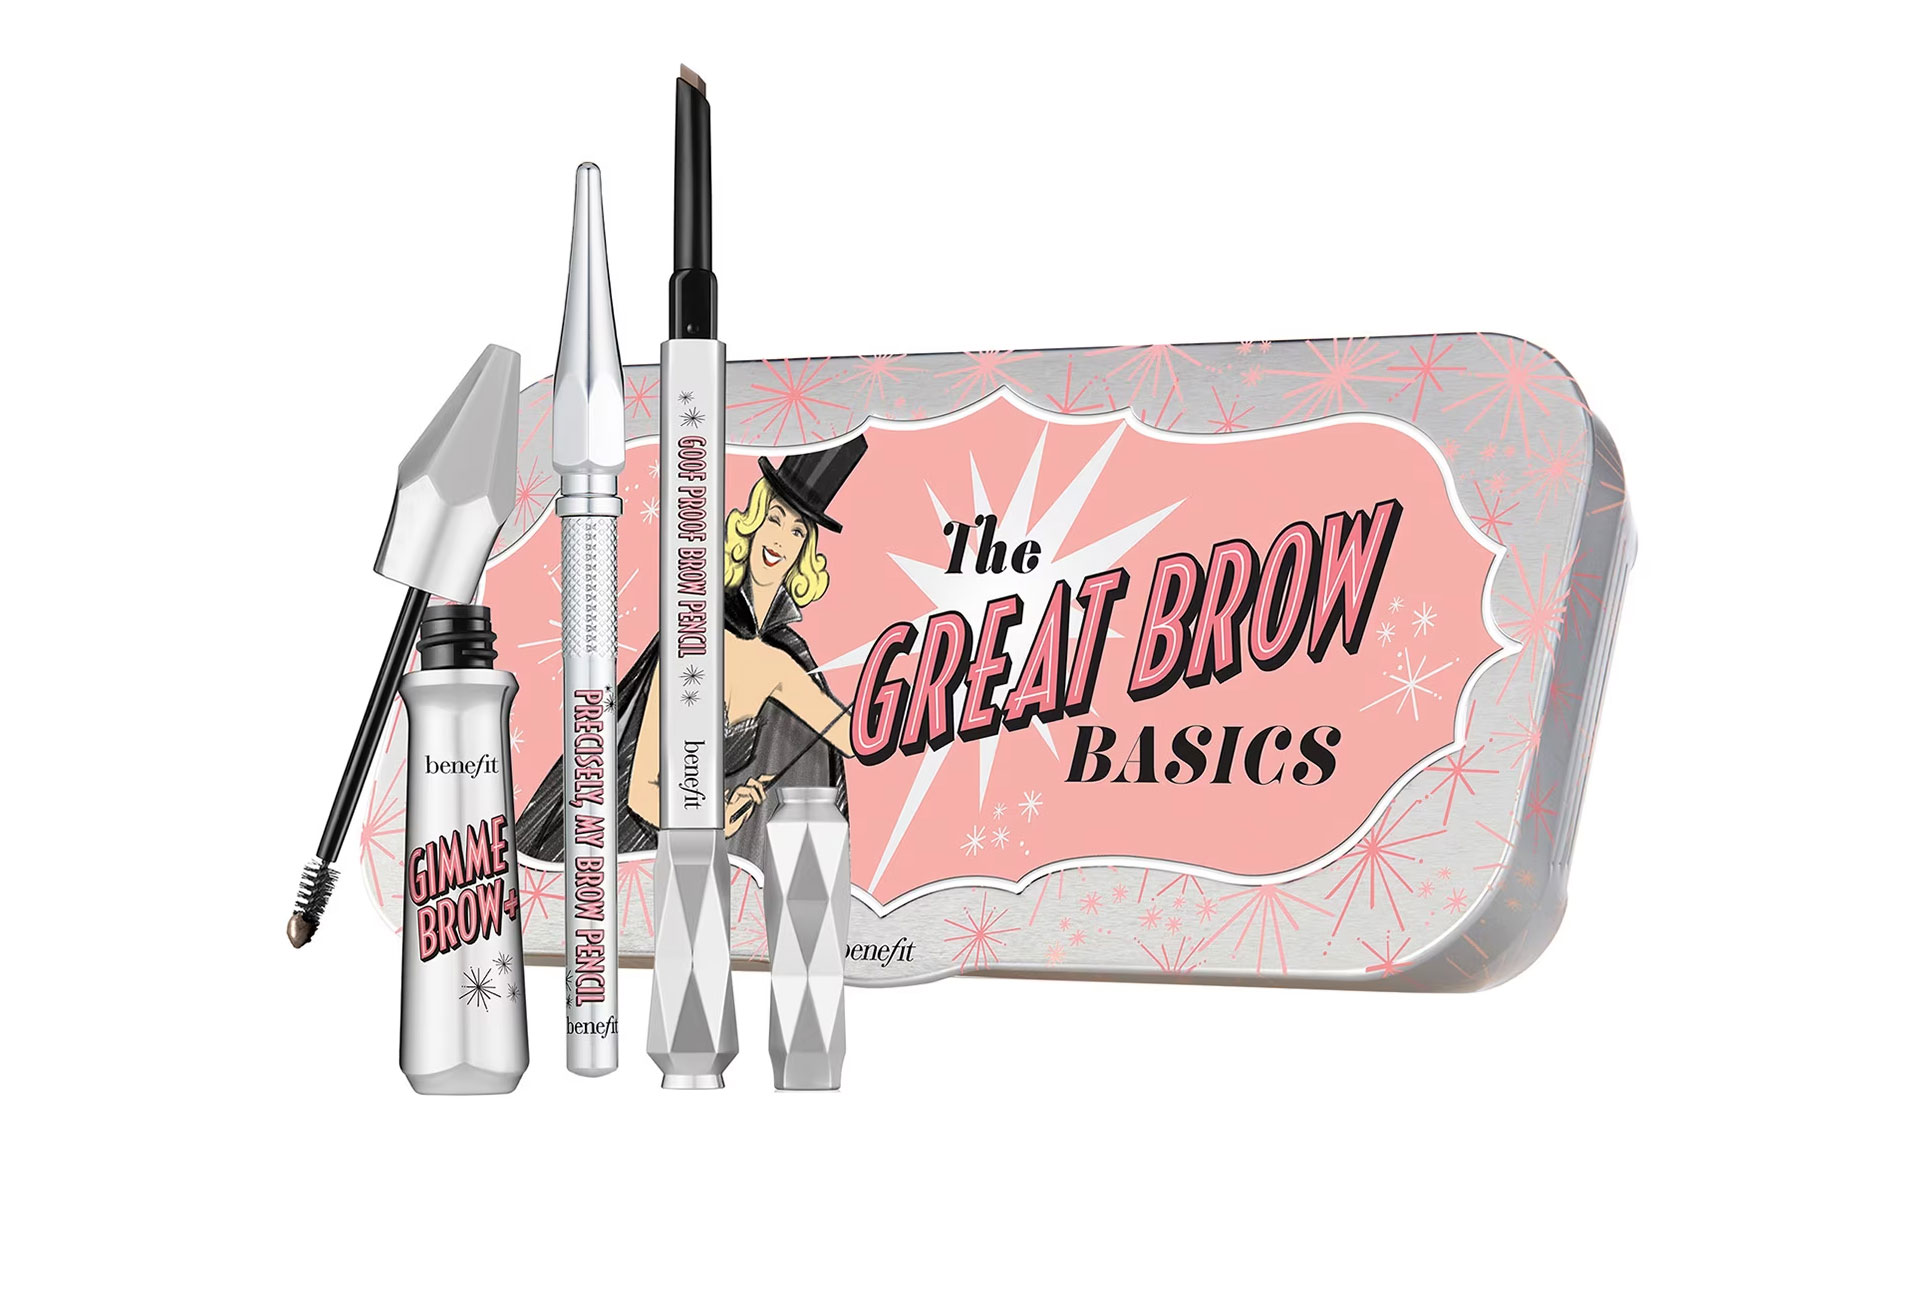 Kit Sourcils The Great Brow Basics, pret 209 lei